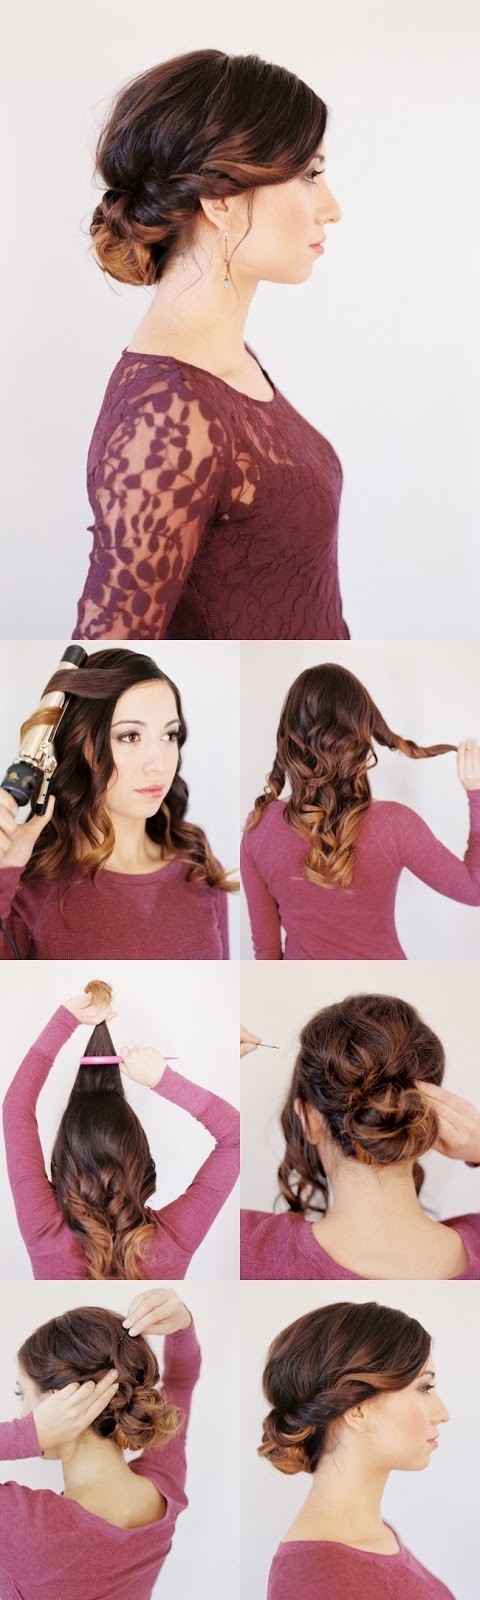 14 Easy Step by Step Updo Hairstyles Tutorials - Pretty Designs